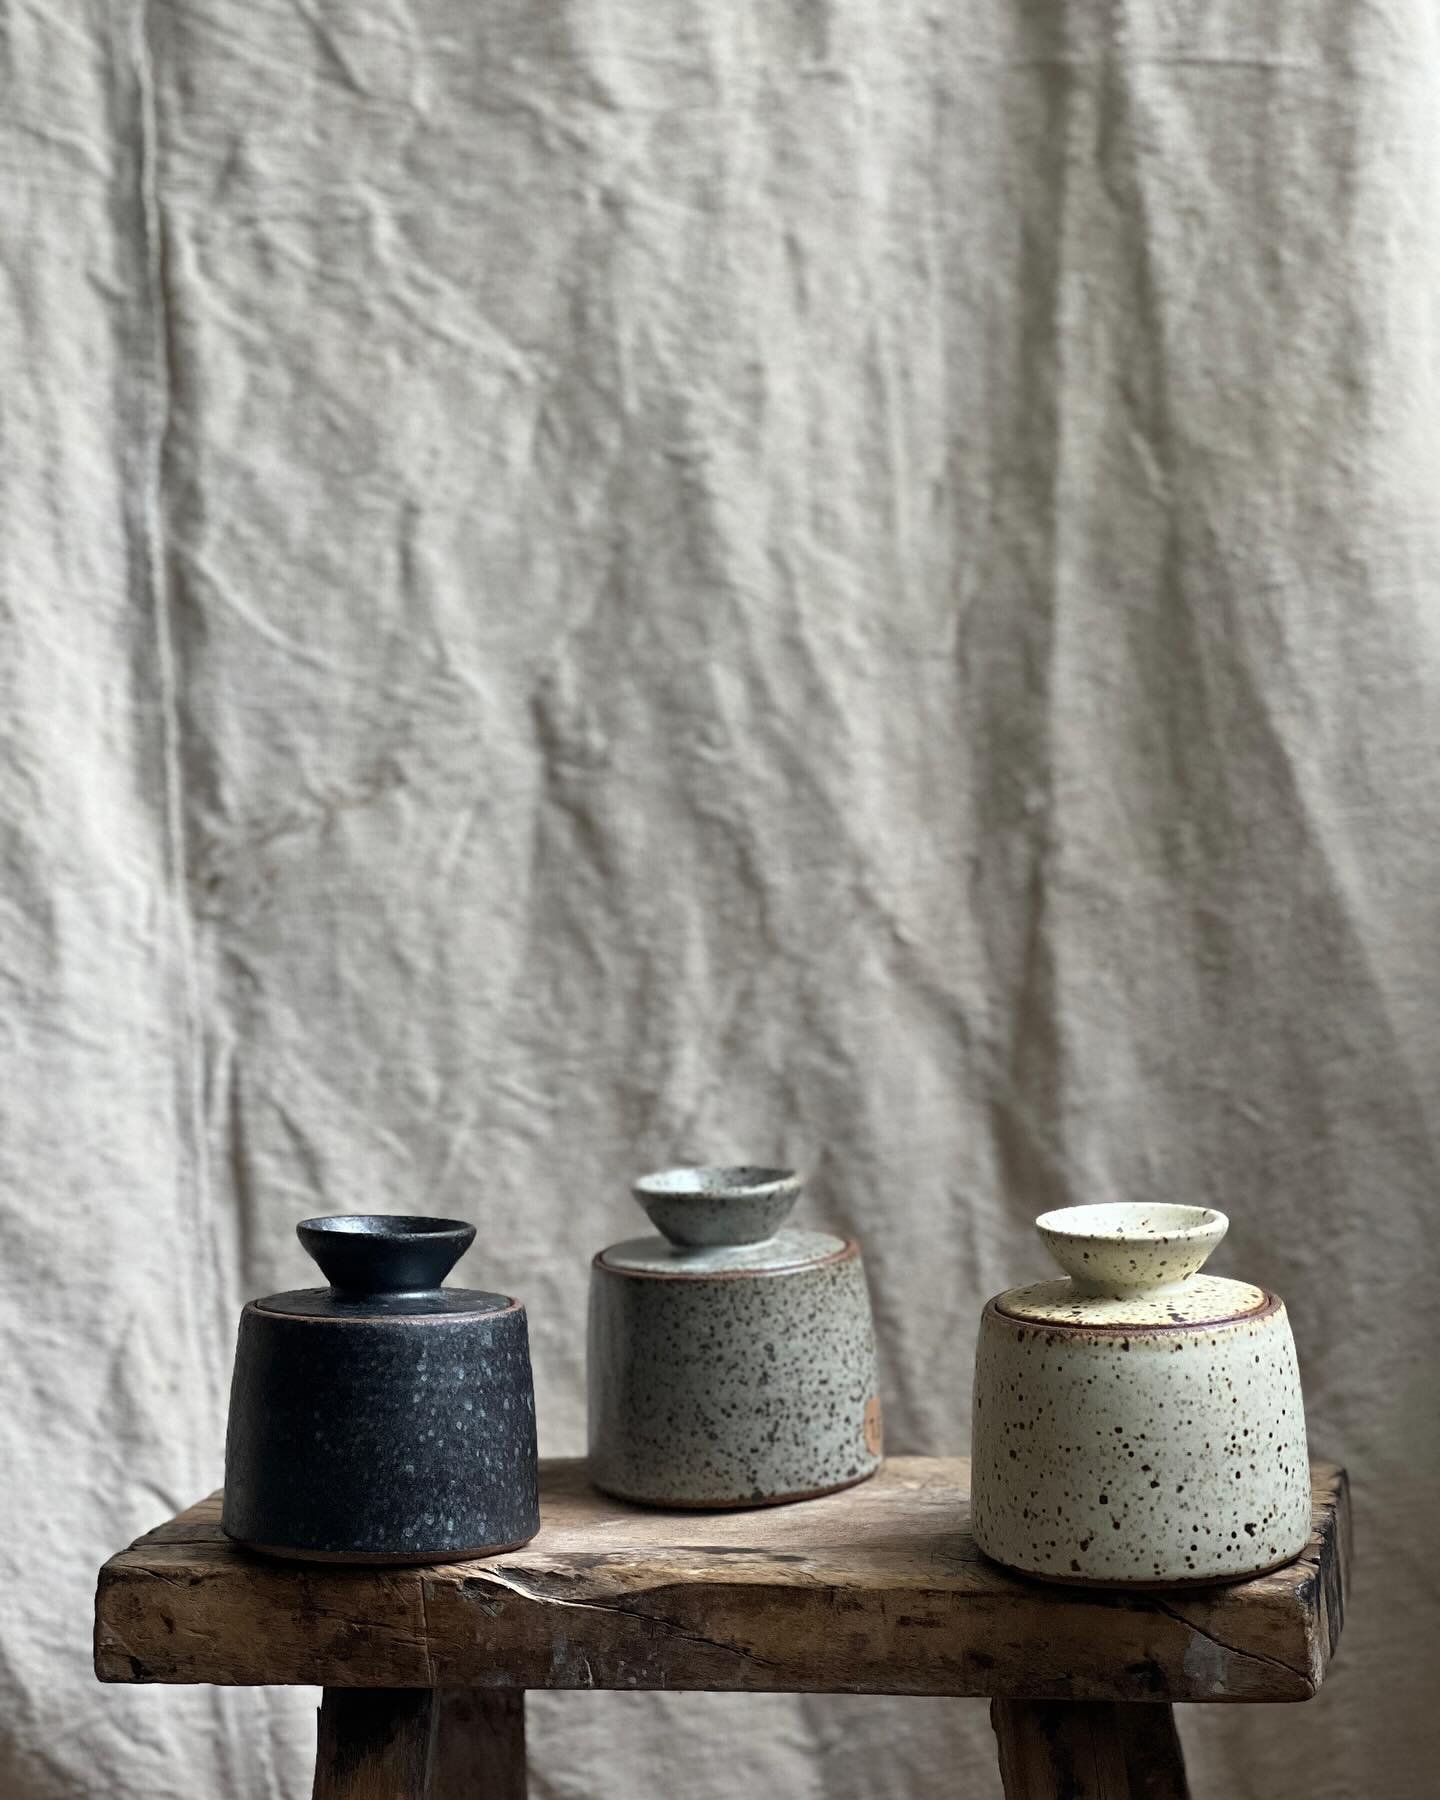 Add a warm beauty to your kitchen with The @manueveryday Lidded Jars ✨ weighty and tactile 🥰